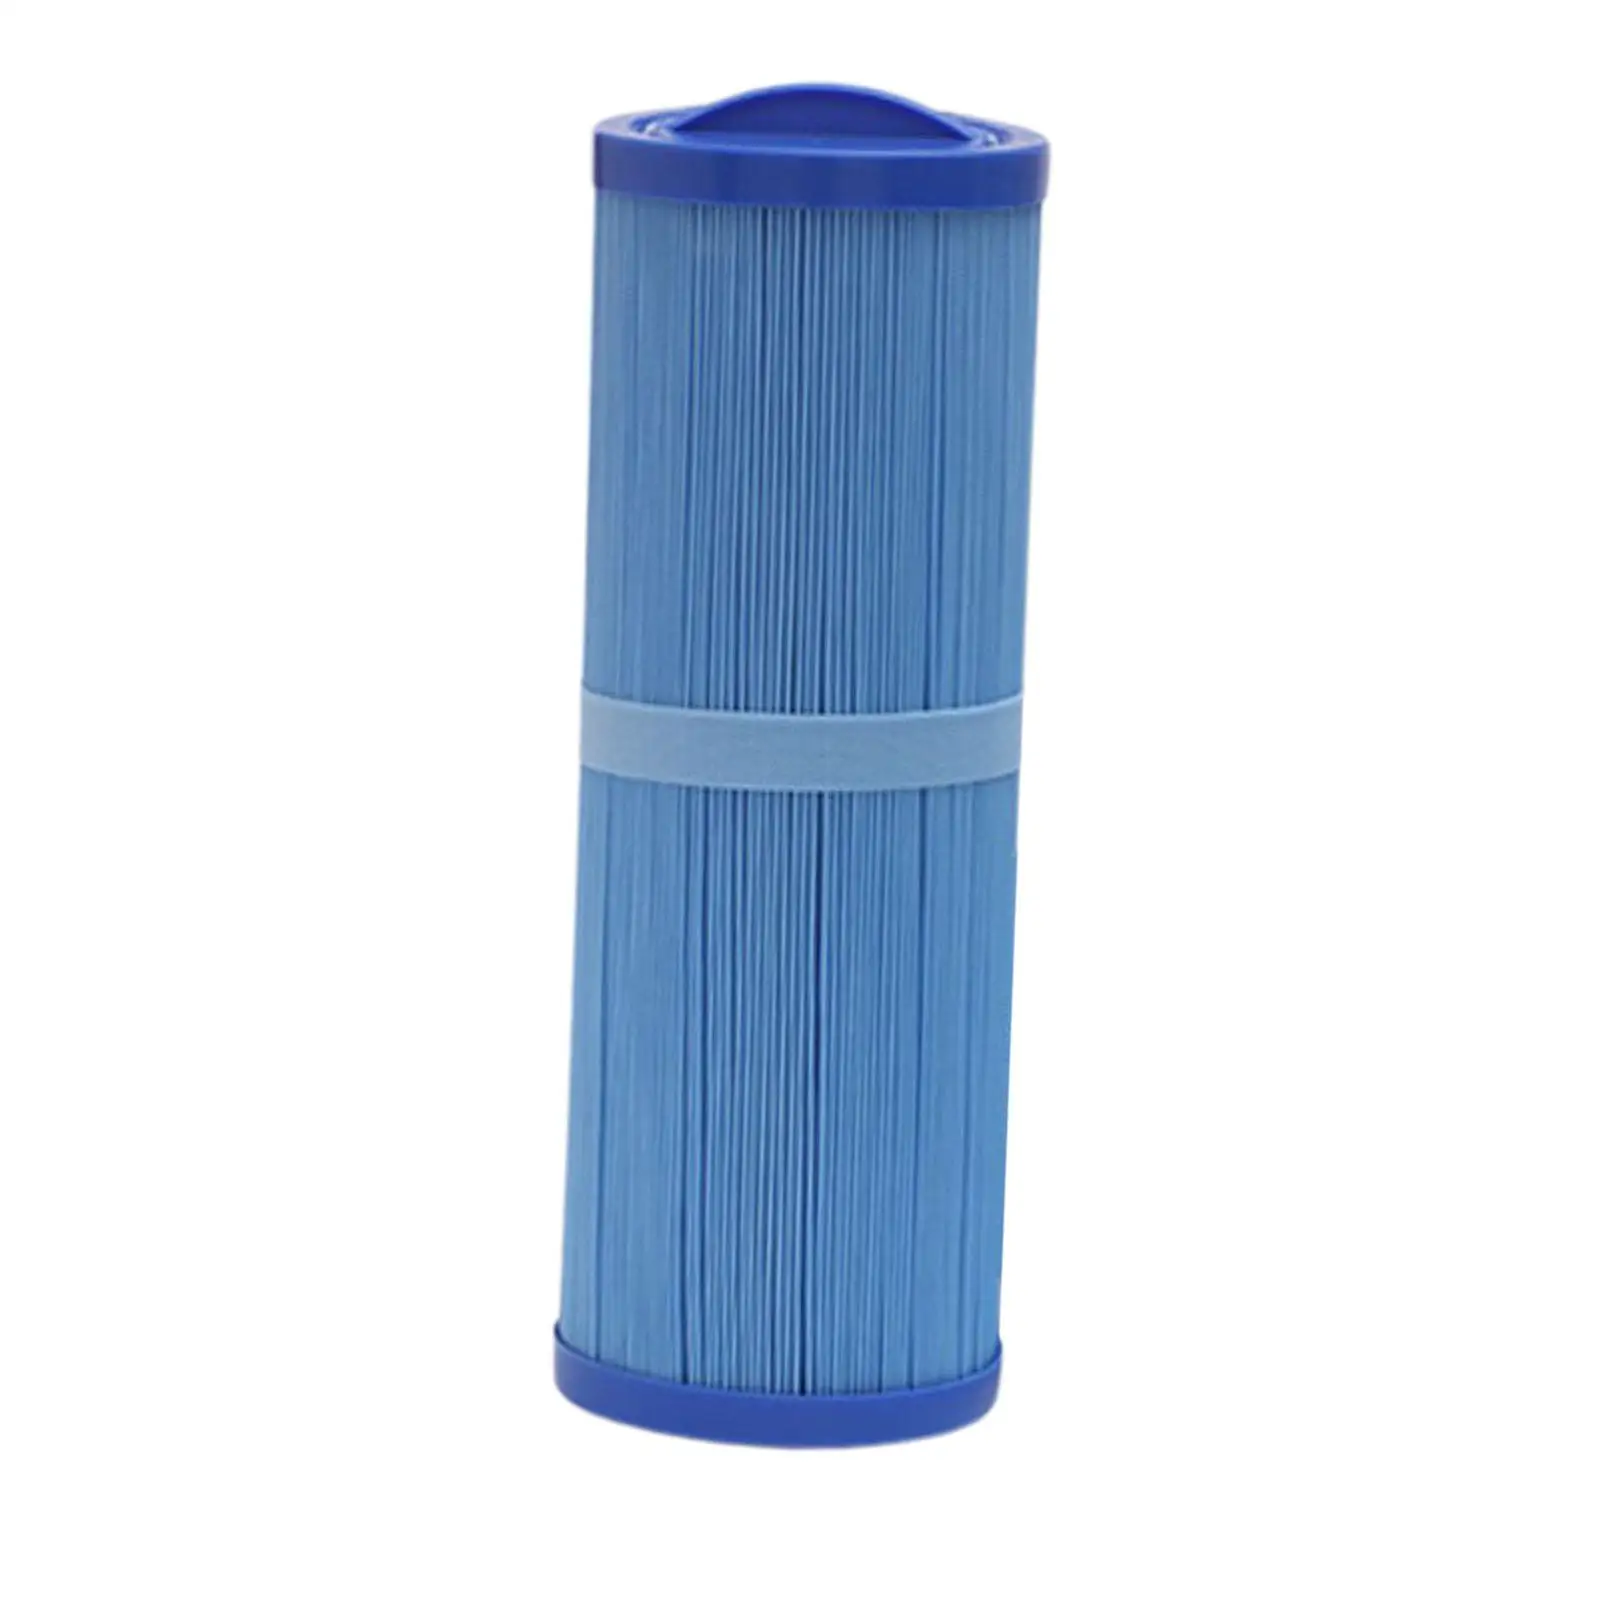 Spa Pool Filter Cartridges Replacement Part for PWW50L-4CH-949 Sifts Out Dirt